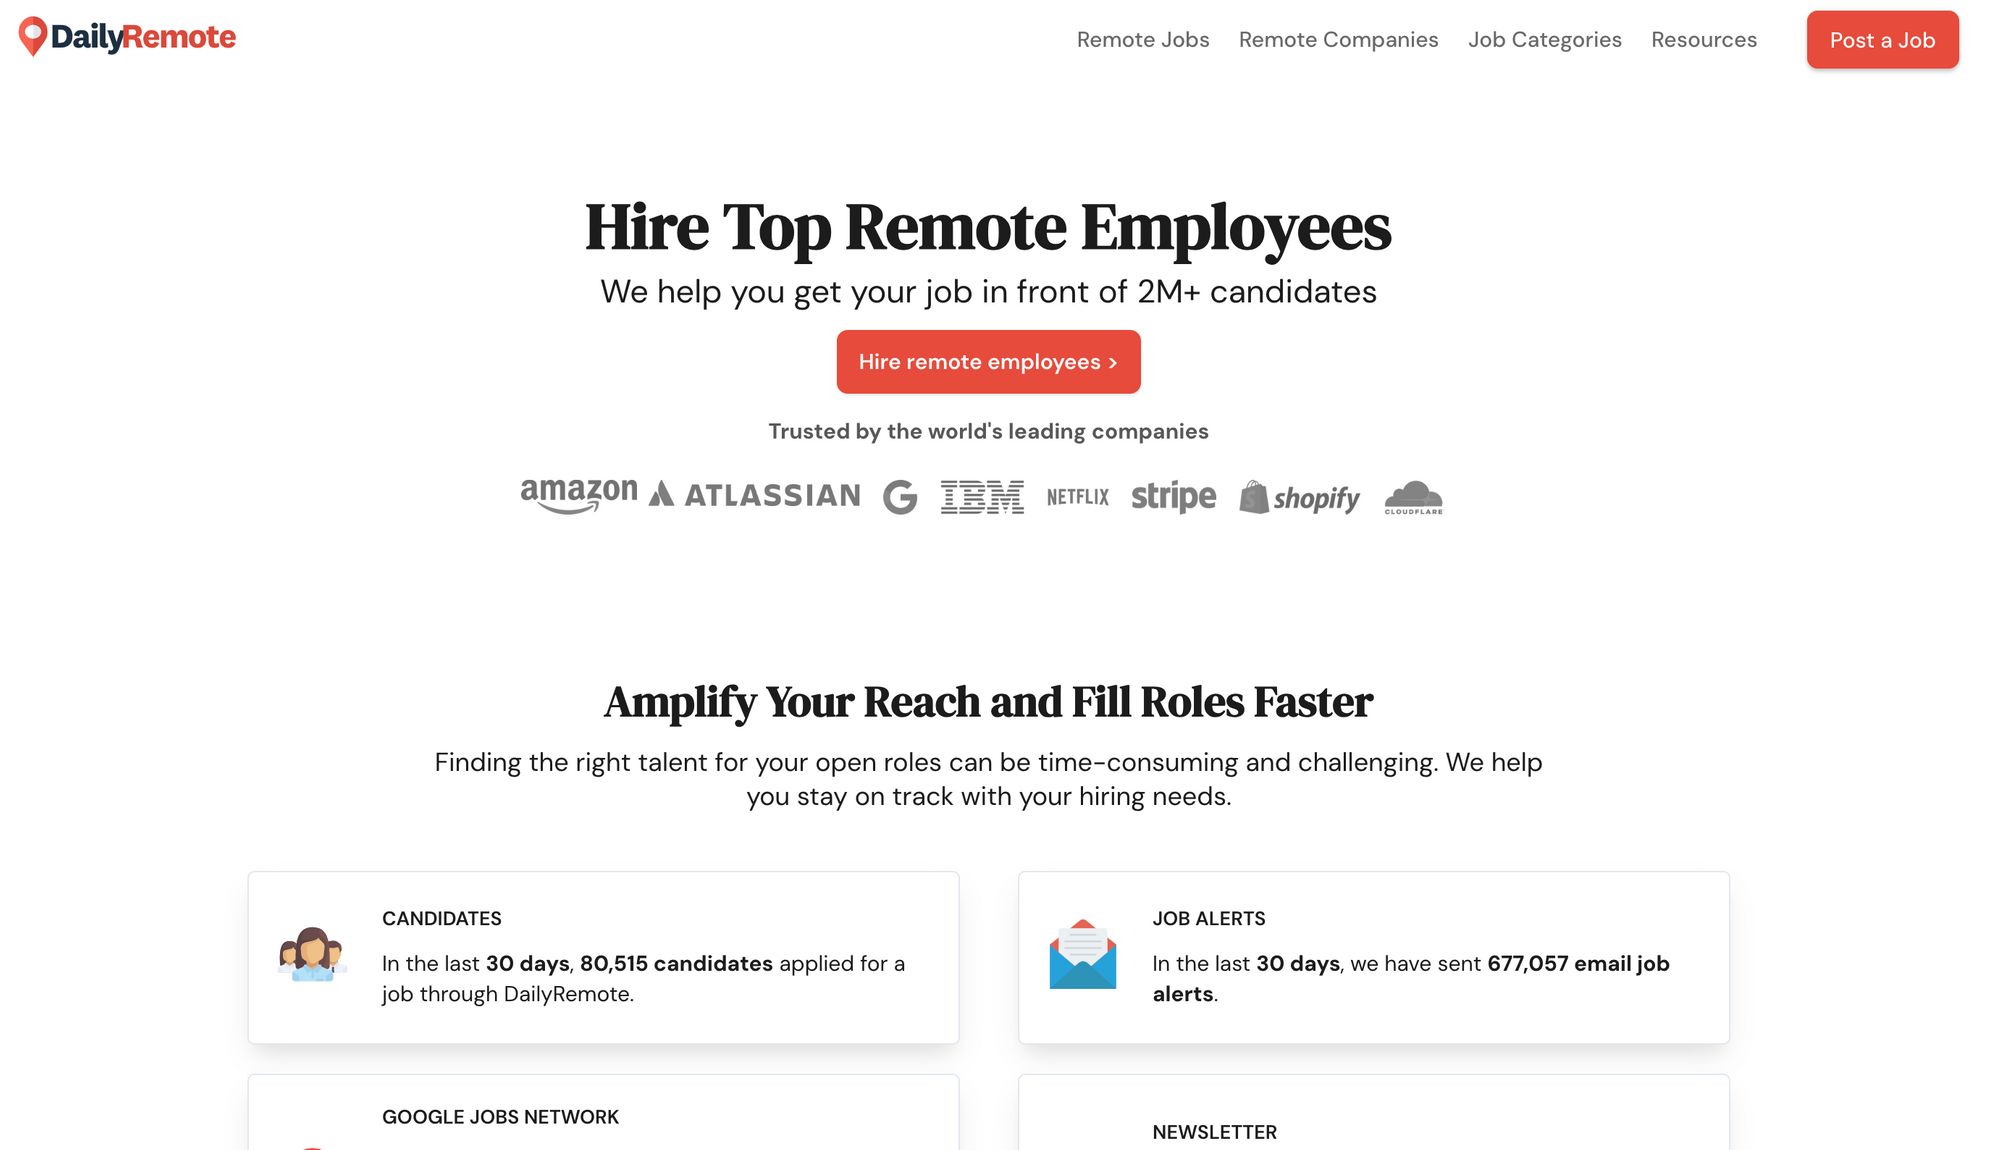 Planning to Hire Remotely: Tips & Tricks